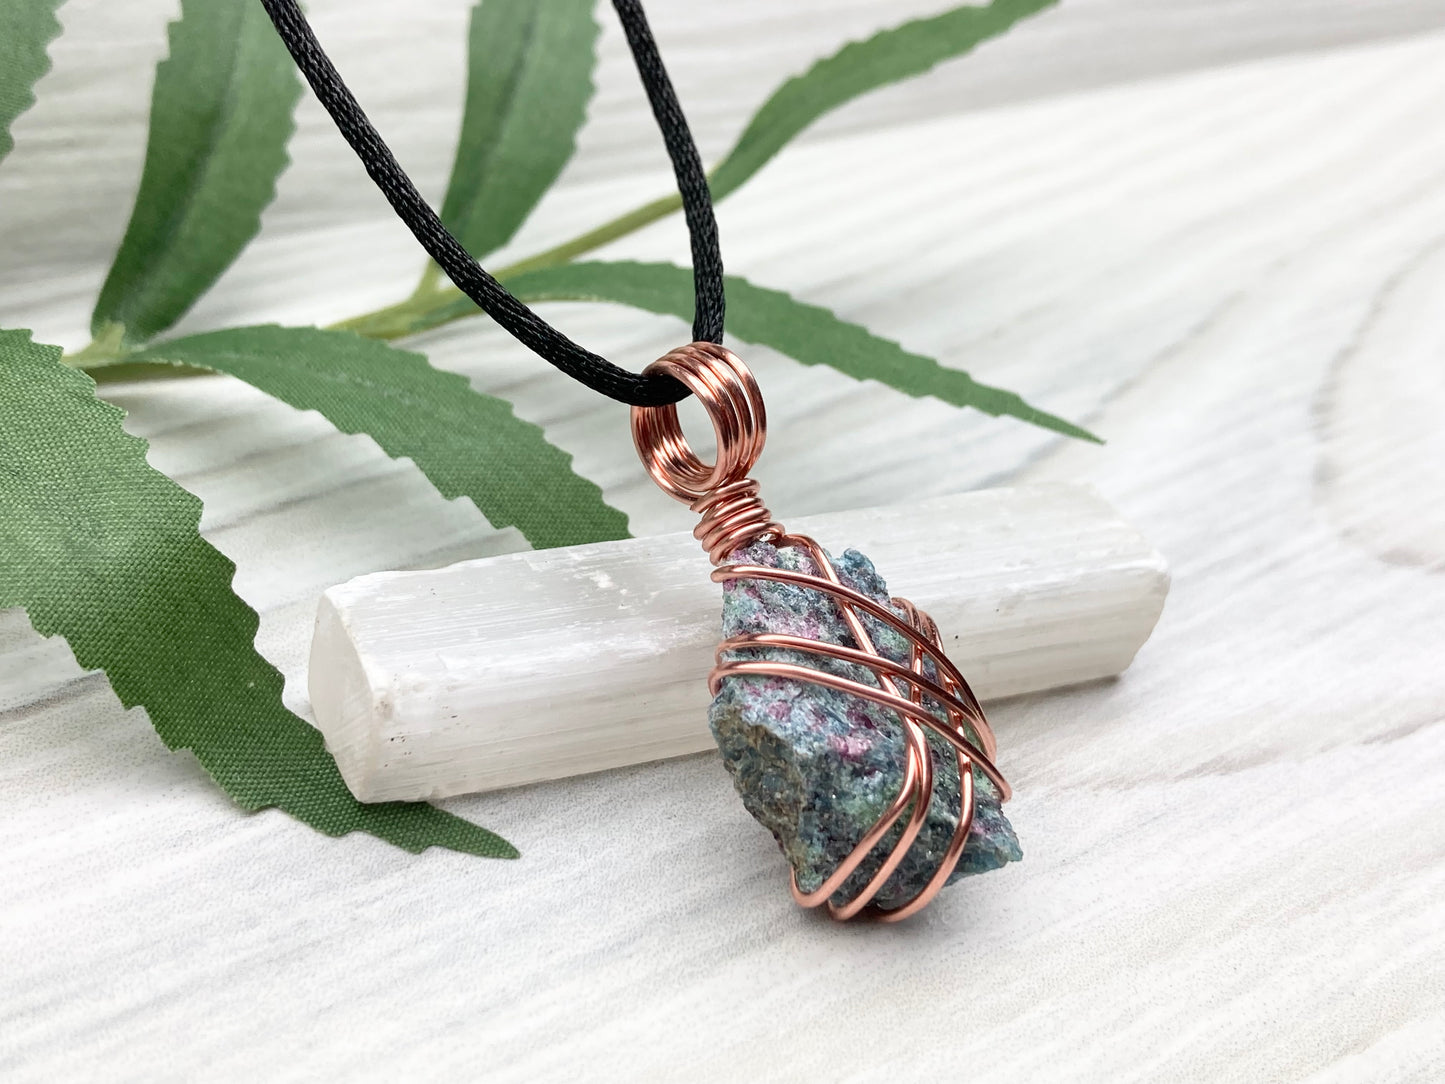 Raw Ruby Zoisite Necklace. This Ruby Zoisite Crystal Is Hand Wrapped With Pure Copper Wire For A Pendant. This Stone is Blue, Red And Green Colored. Comes On A Black Chain. Spiritual New Age Style Jewelry. Right Side View.